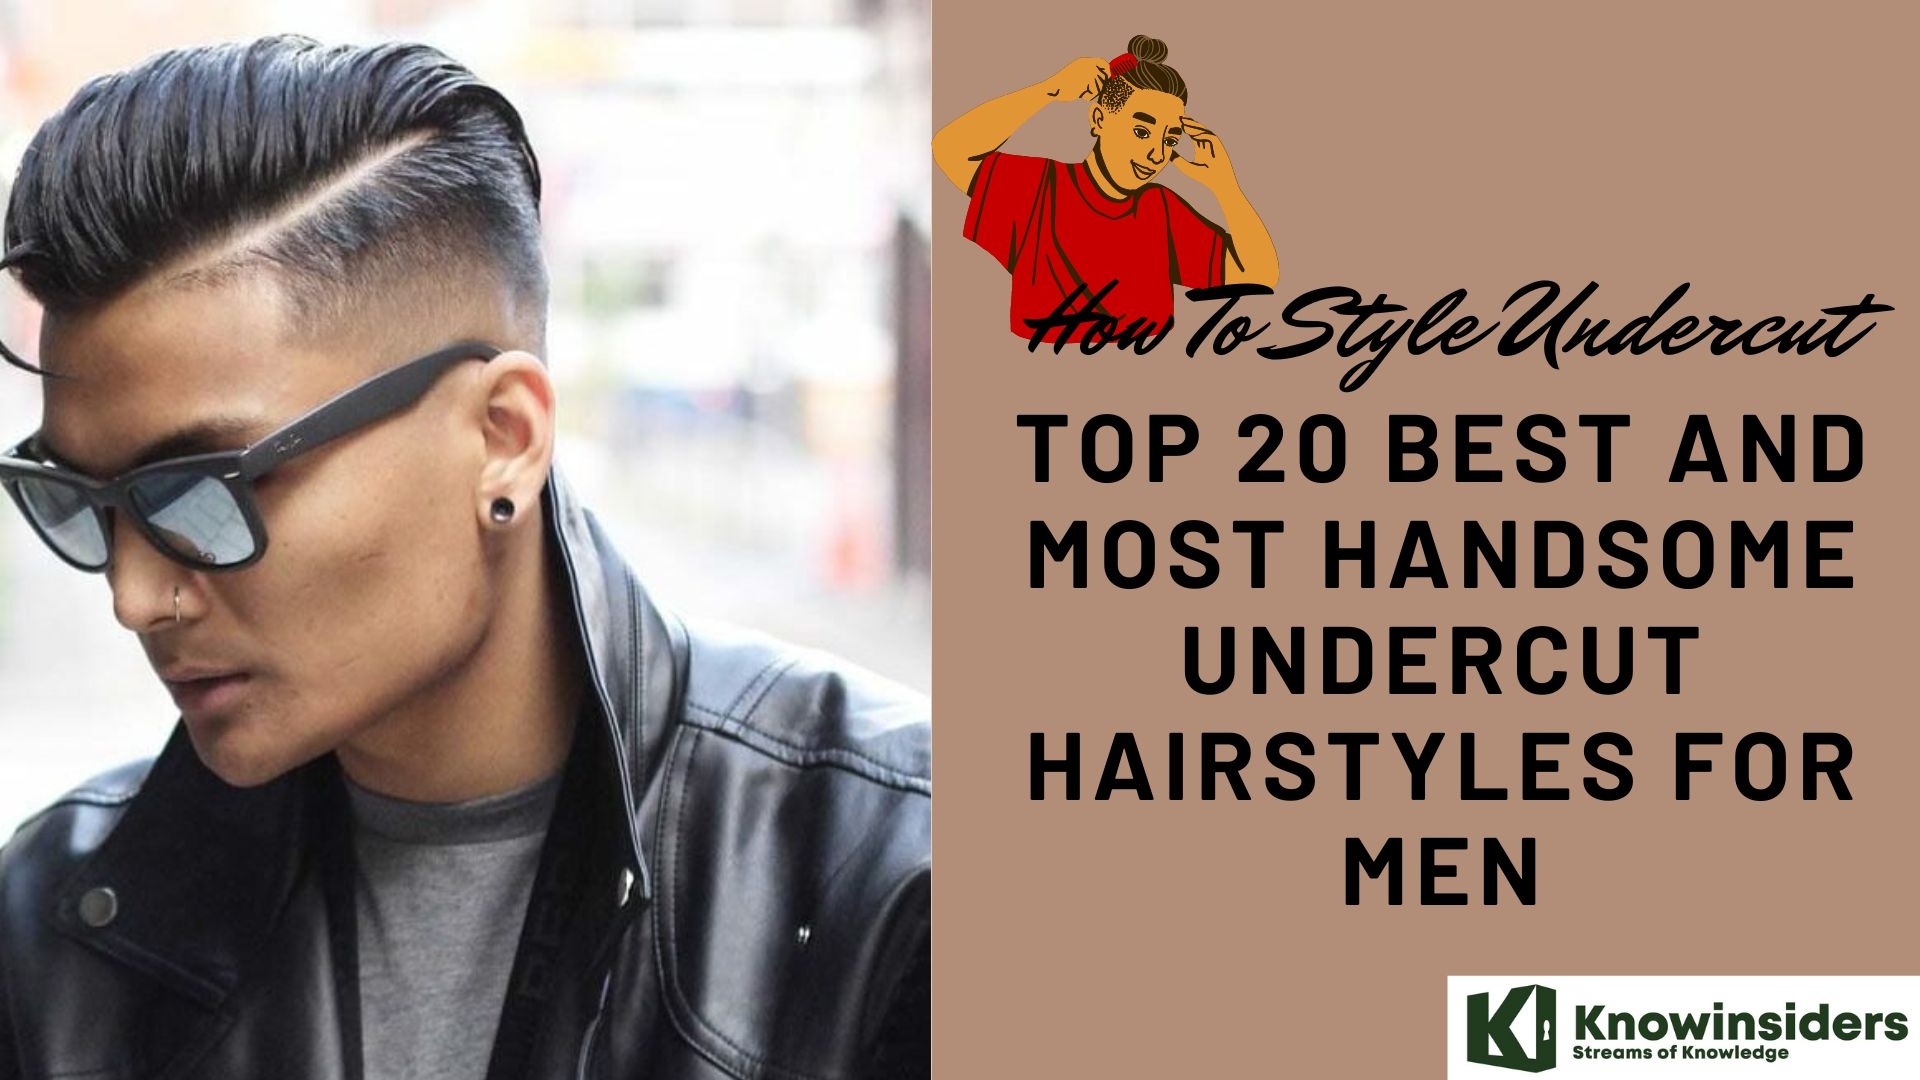 How To Style Undercut: Top 20 Best And Most Handsome Undercut Hairstyles For Men Knowinsiders.com